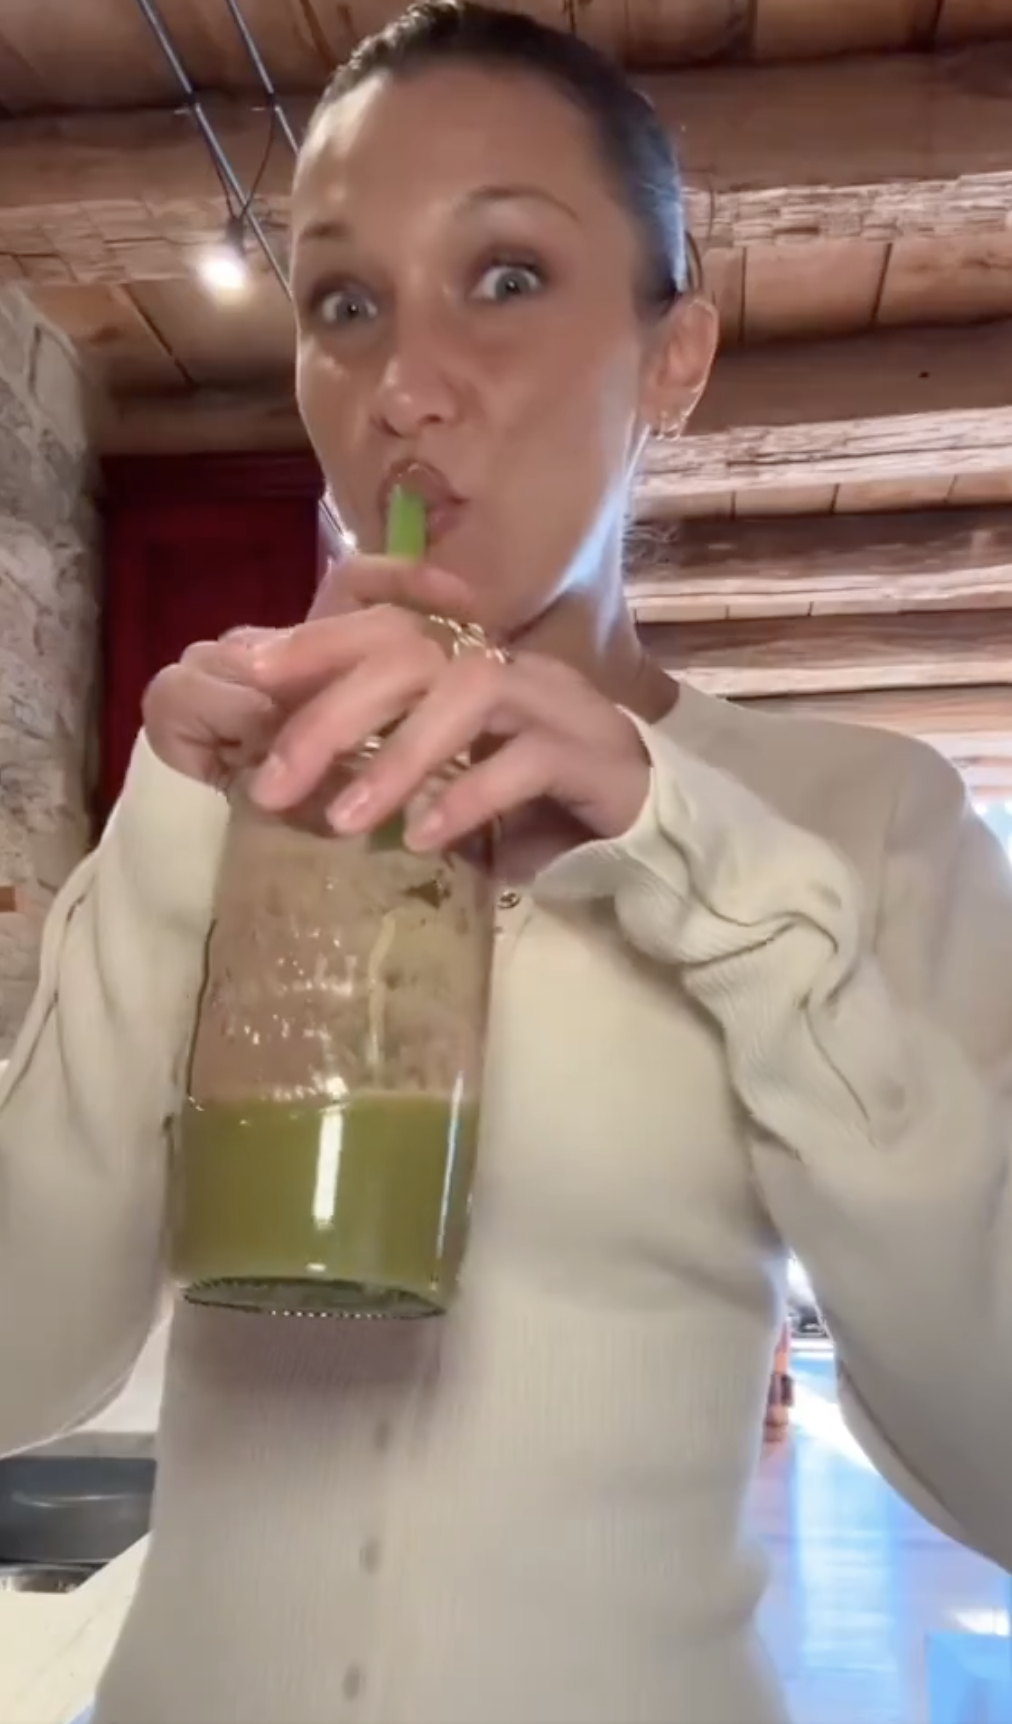 Bella sipping a green drink through a straw, wearing a casual buttoned top